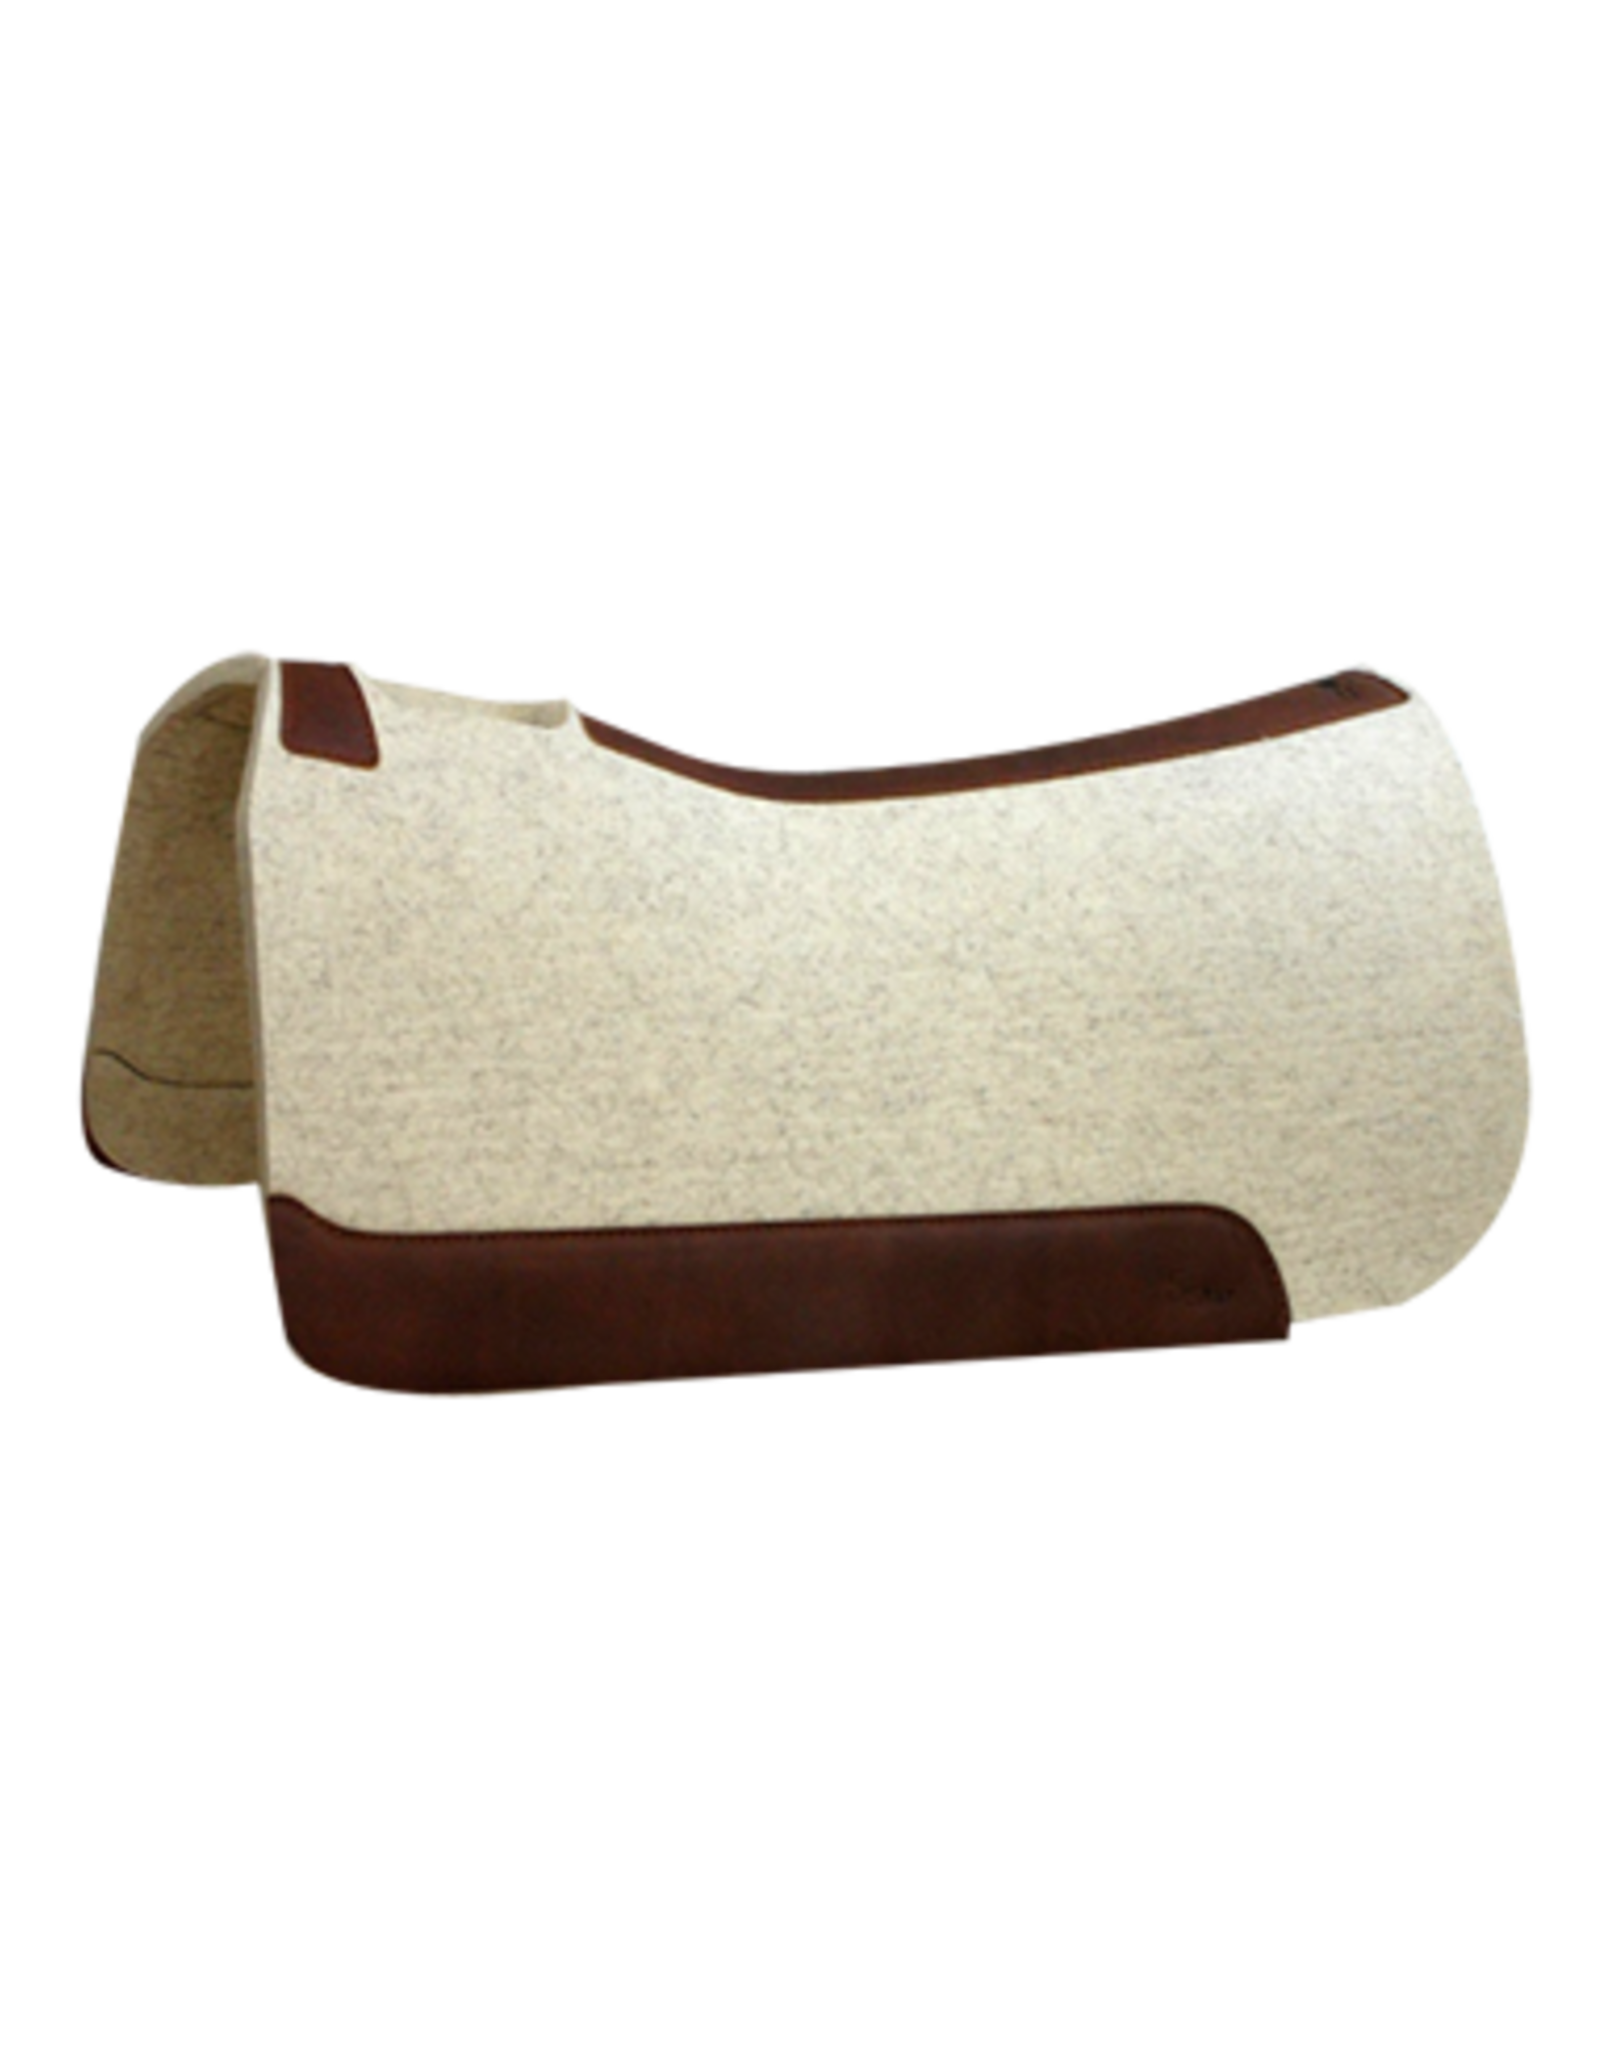 5 Star Equine Products 5 Star Equine 3WN-FS 3/4” Natural Western Contoured Pad 32x32 with Cinch Cutouts